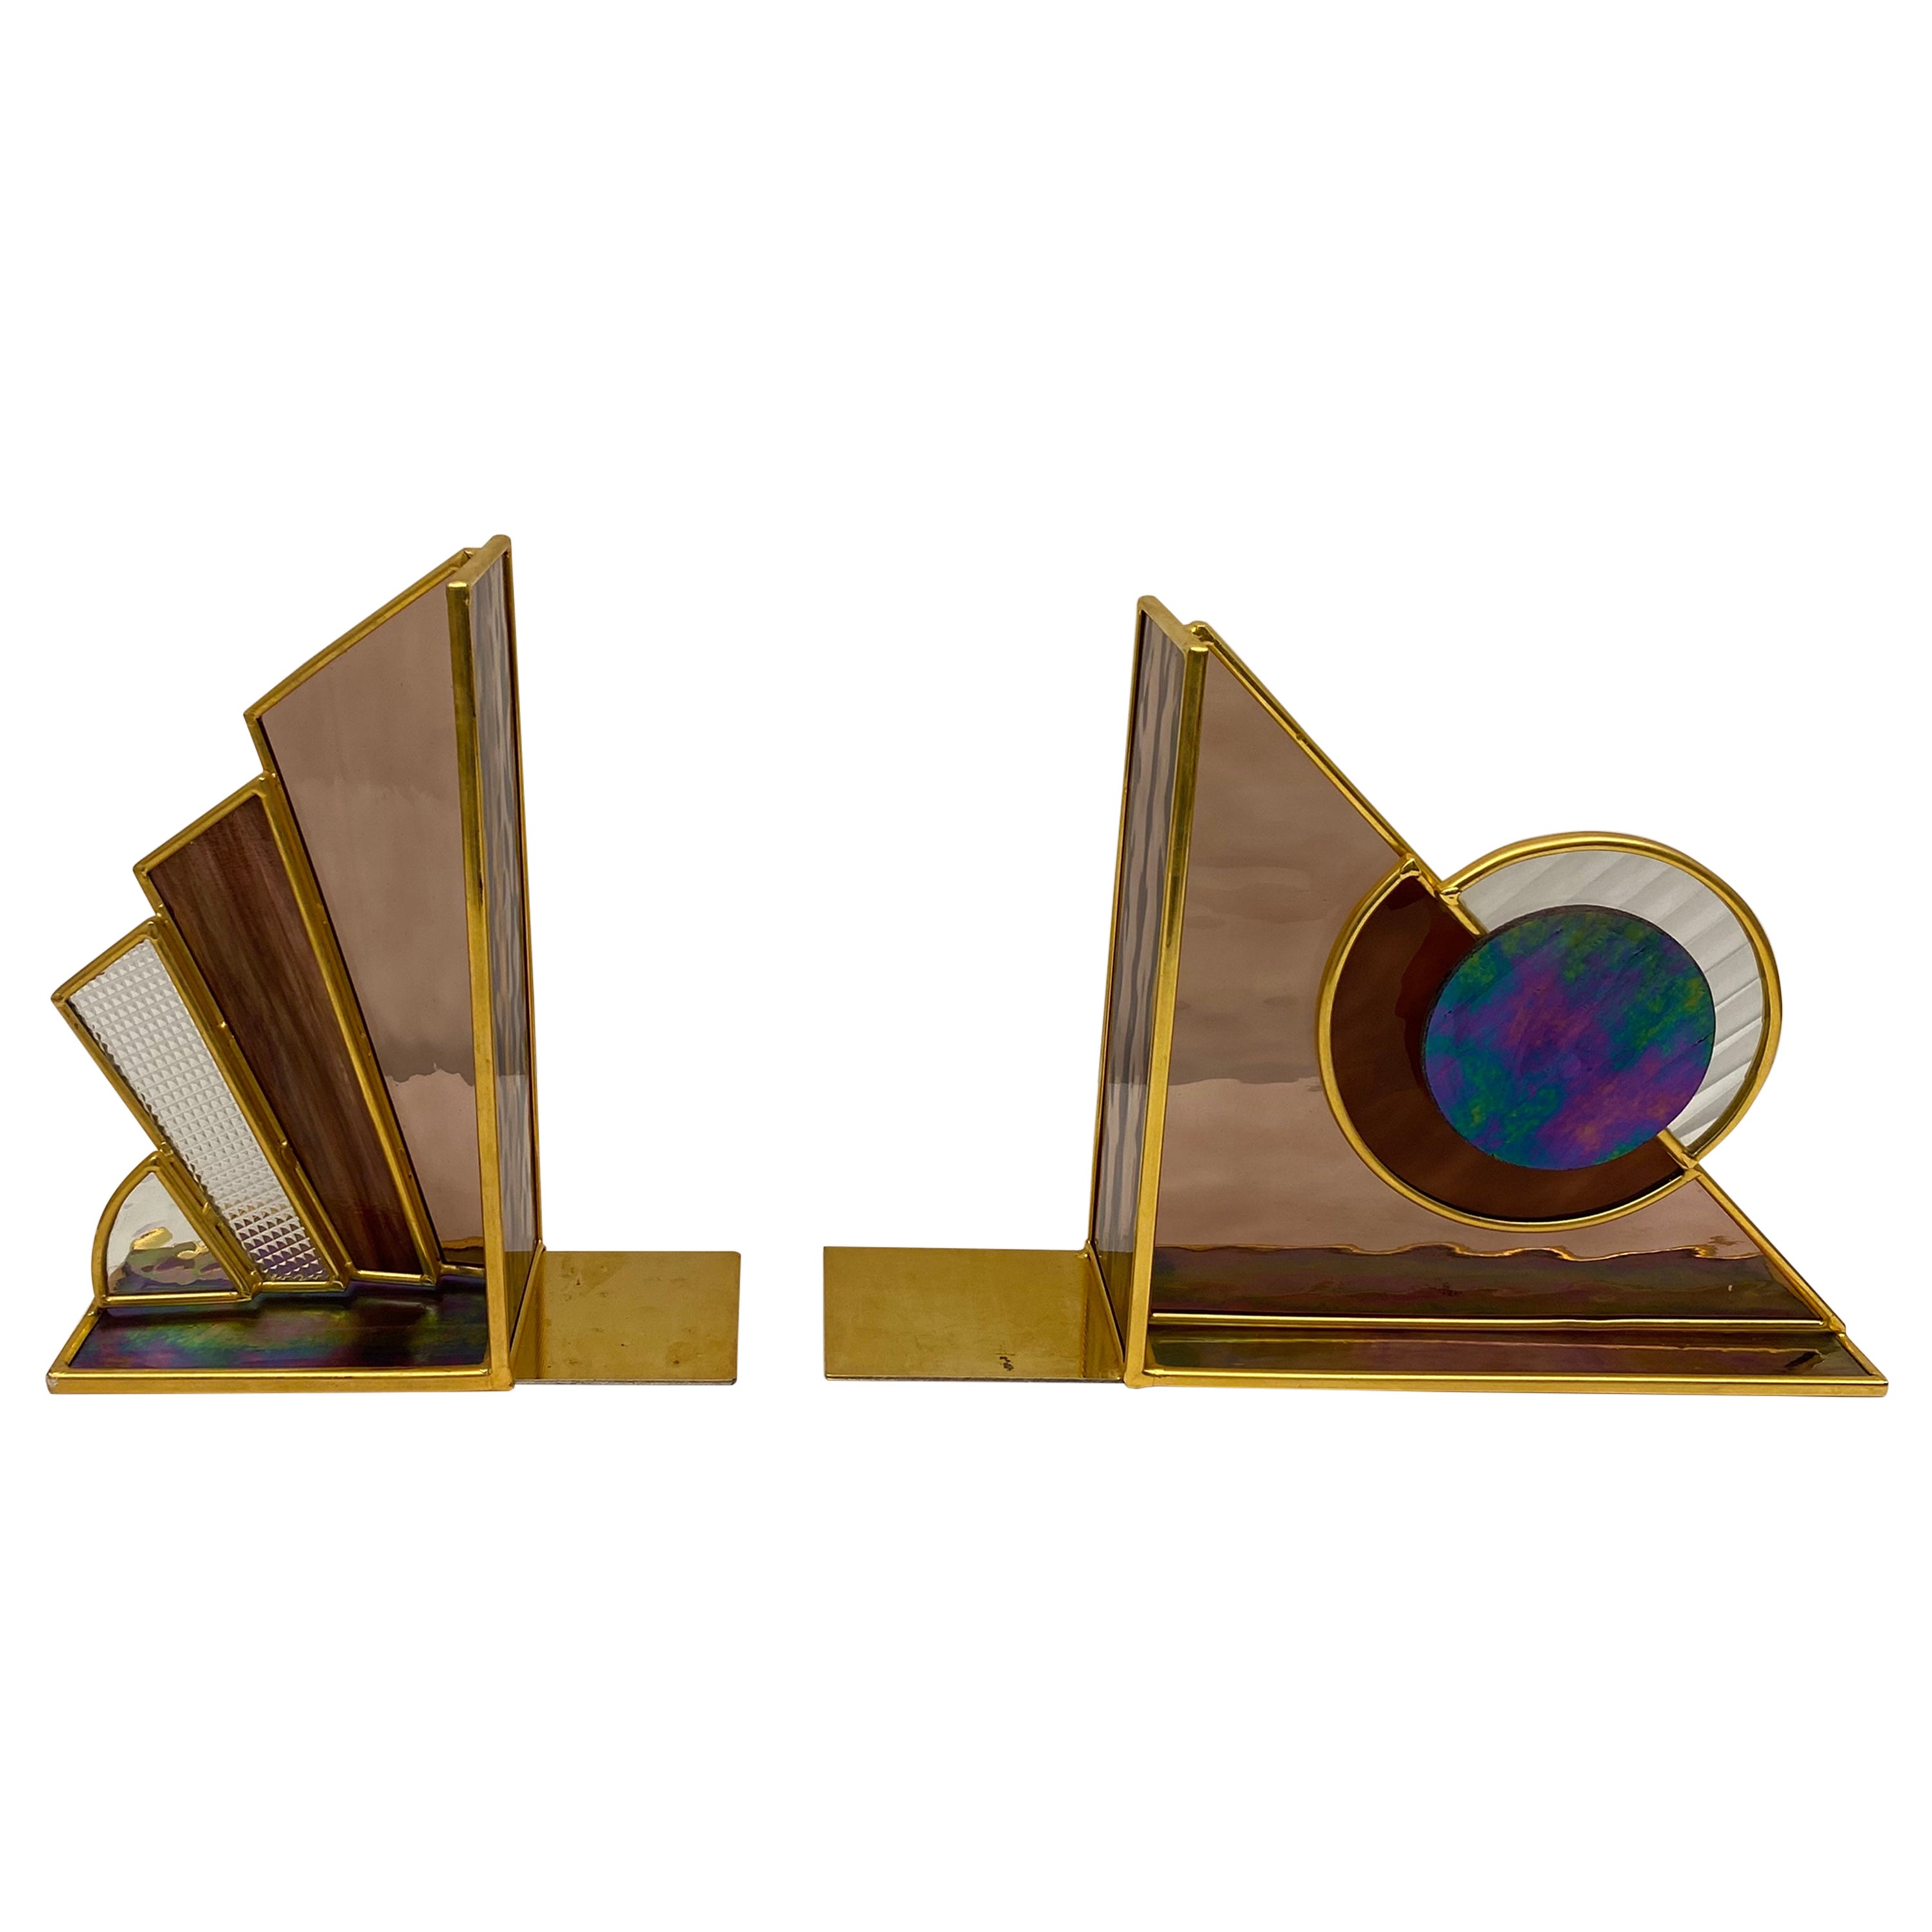 Pair of Uniquely Designed Stained Glass and Brass Bookends, Un-matching